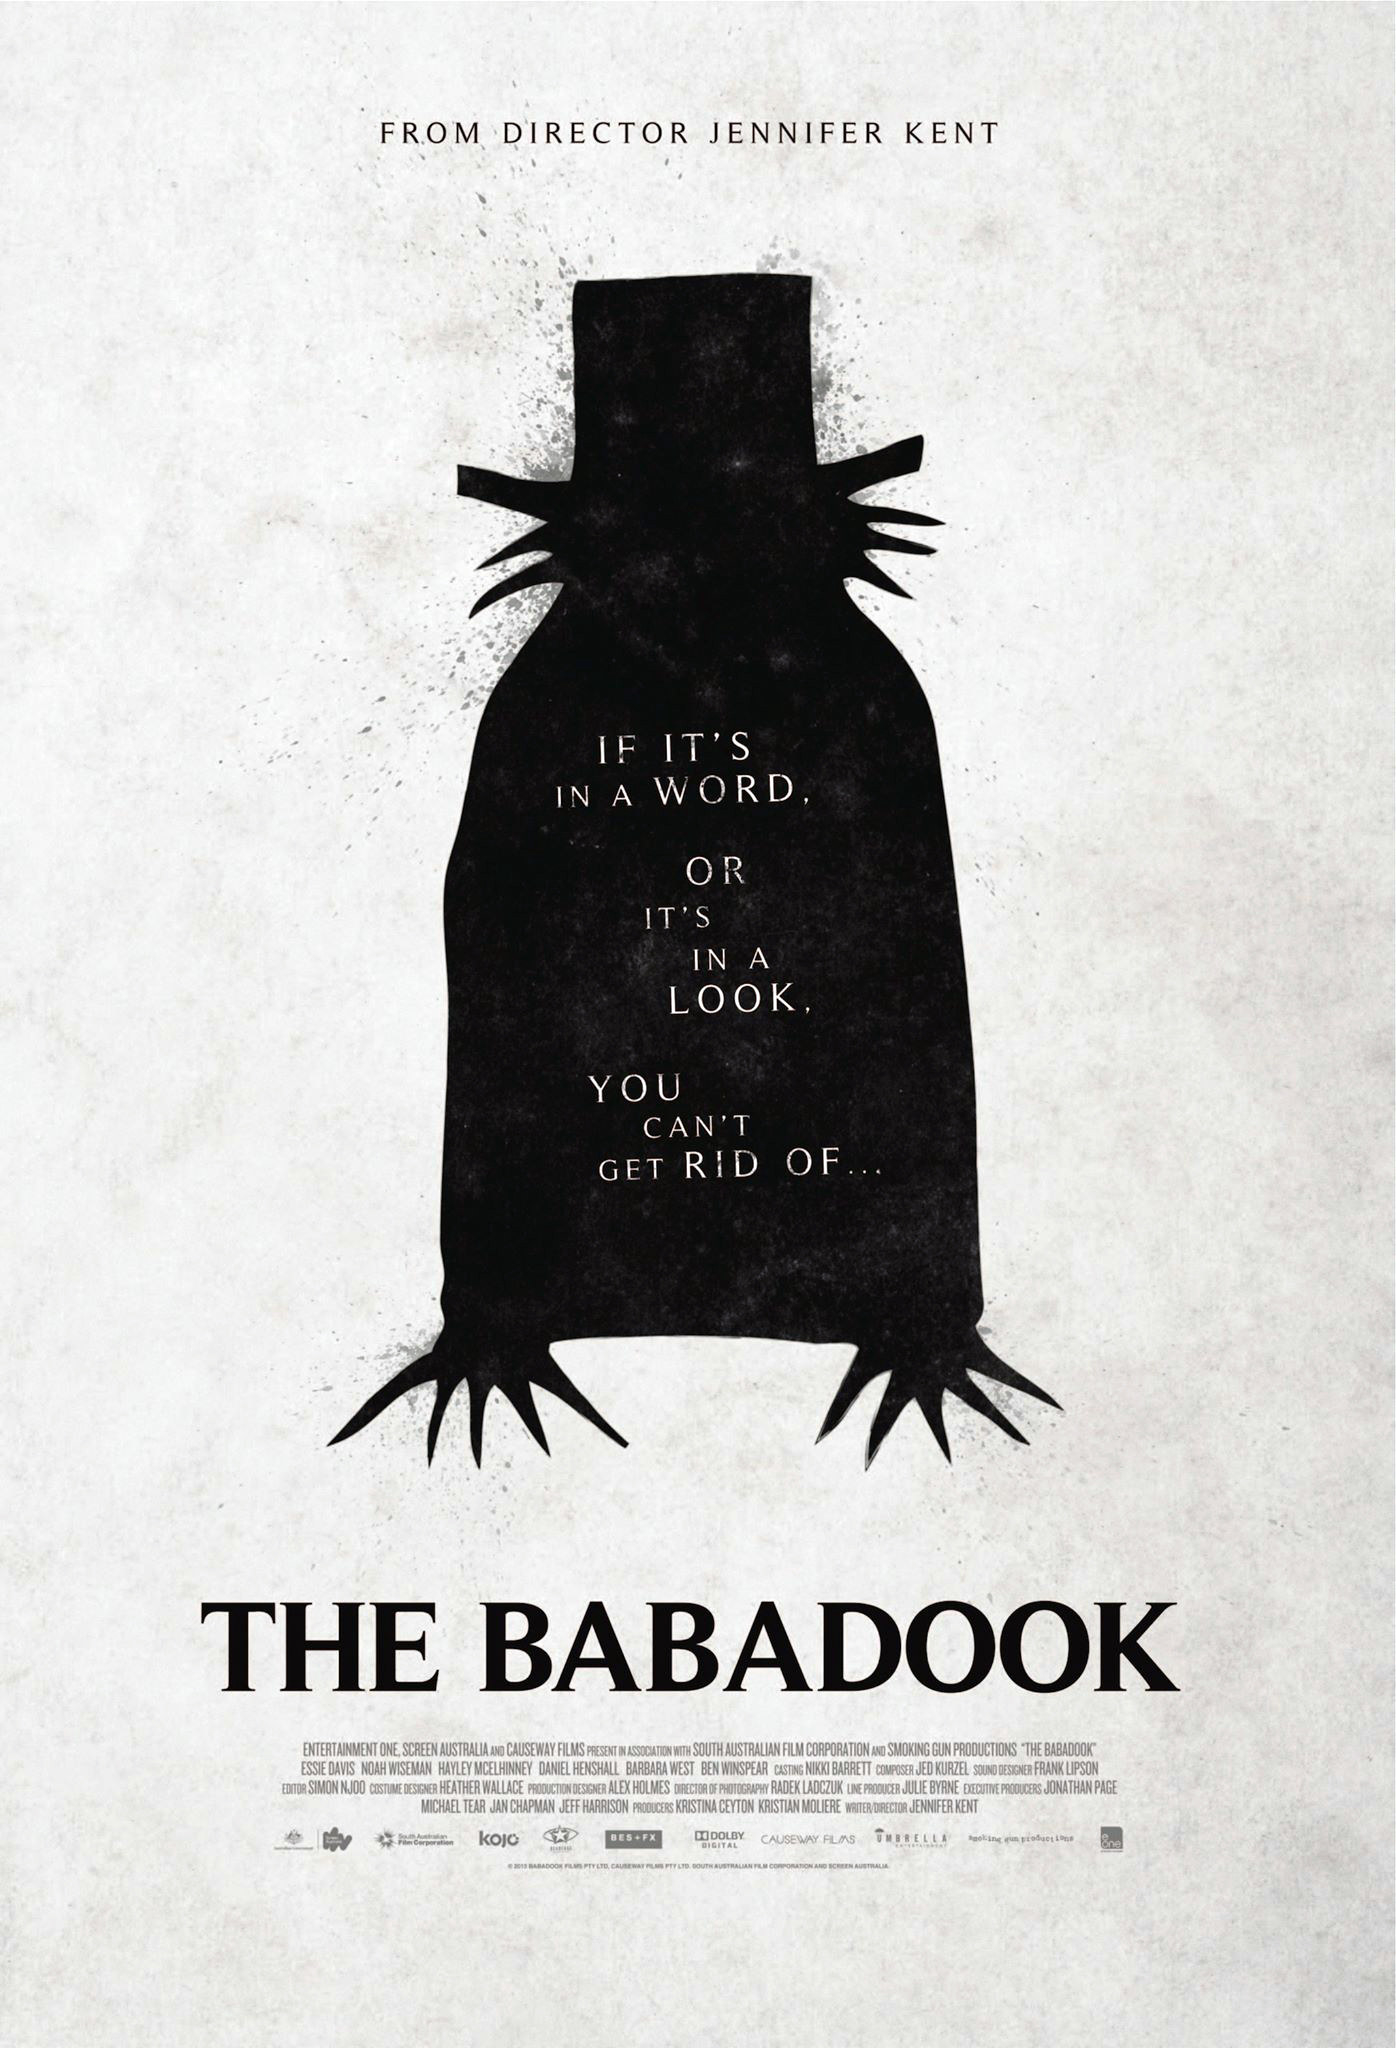 the poster of the Babadook